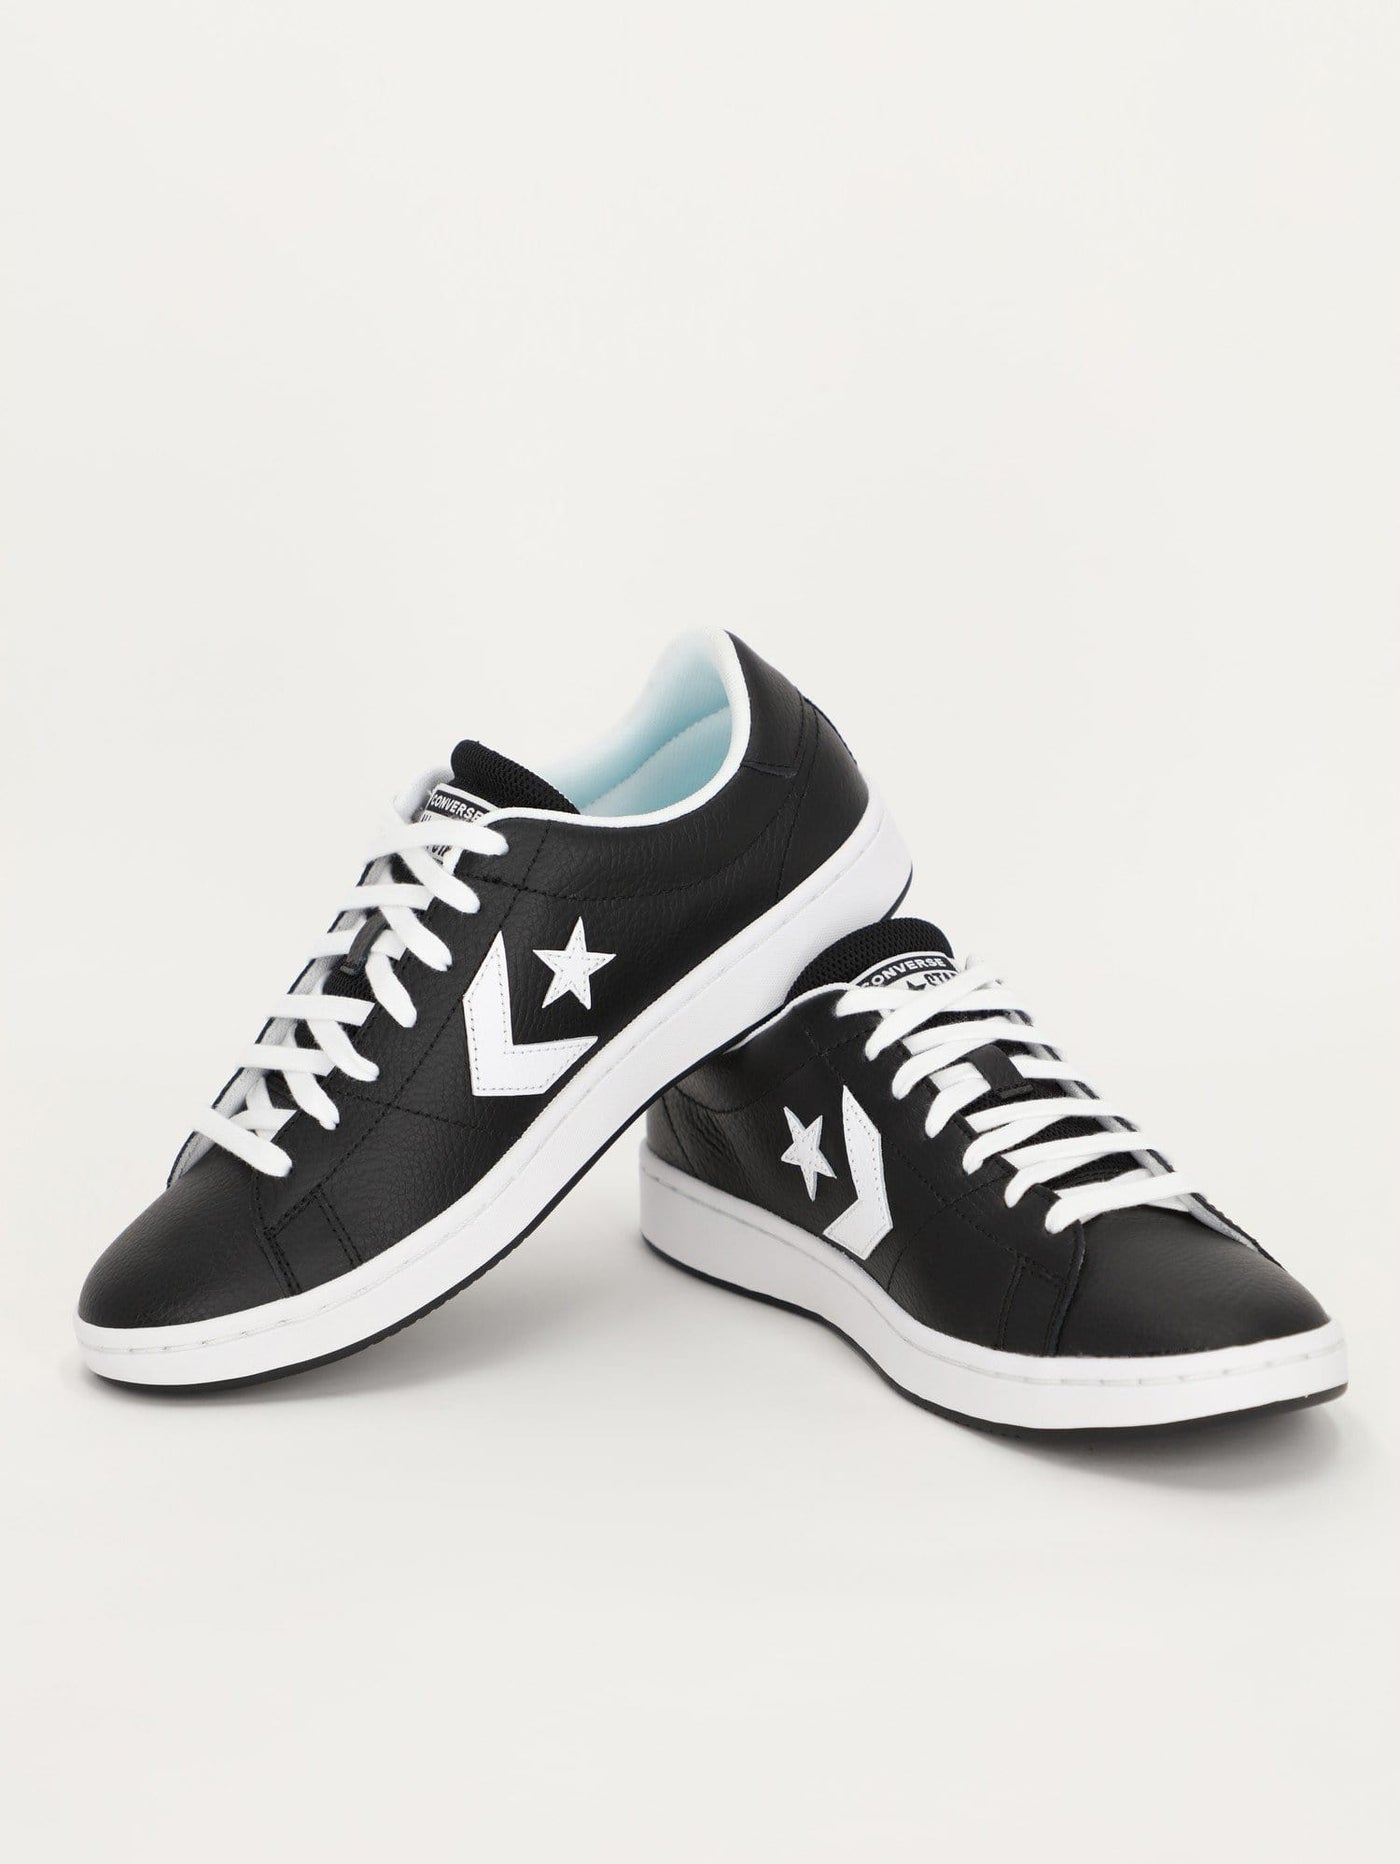 Converse Sneakers Black/White / 44 Chuck Taylor All Star Ox All Court Rivals Sneakers - 168785C